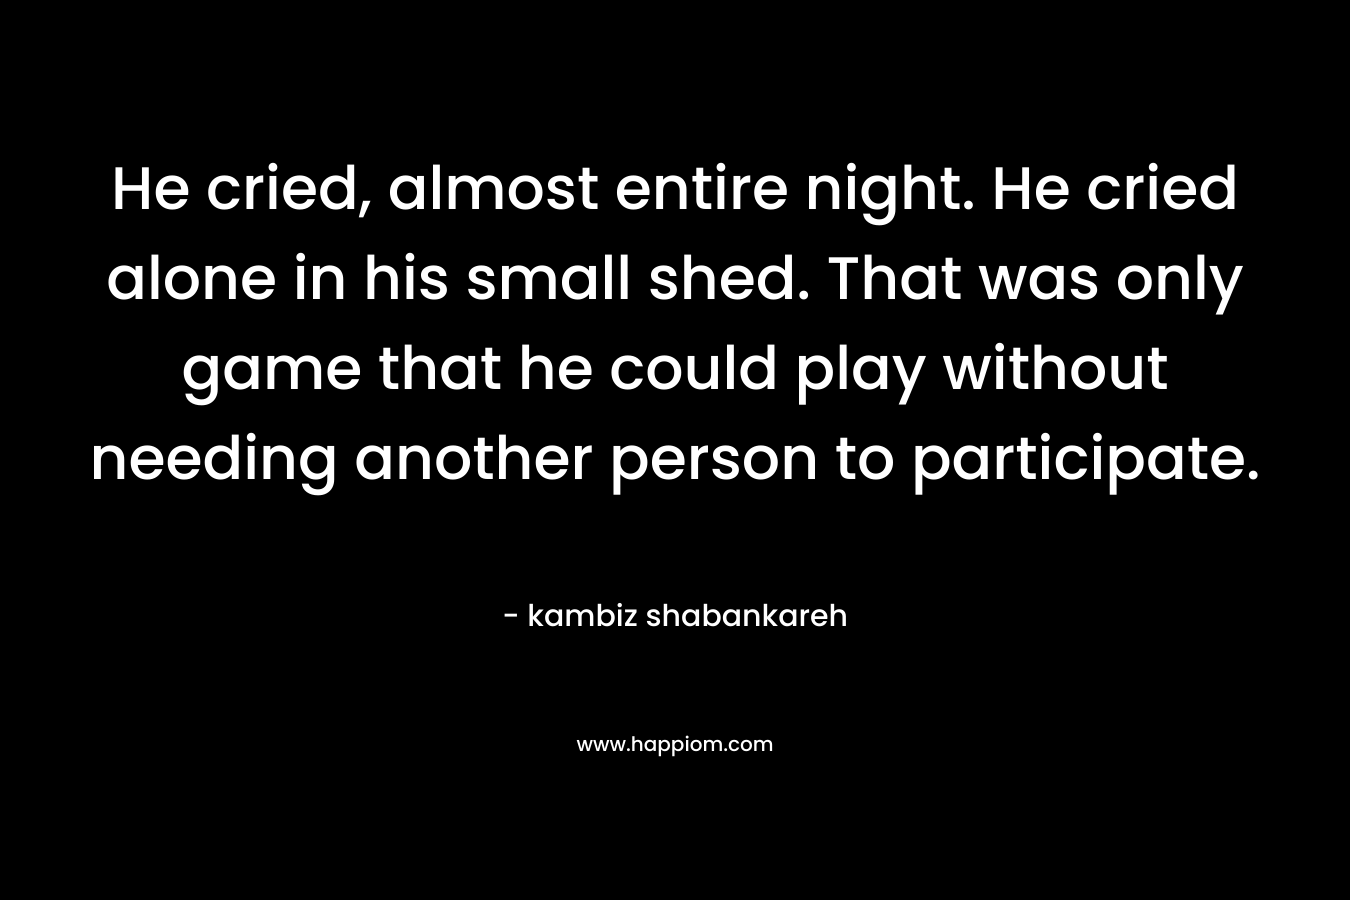 He cried, almost entire night. He cried alone in his small shed. That was only game that he could play without needing another person to participate. – kambiz shabankareh